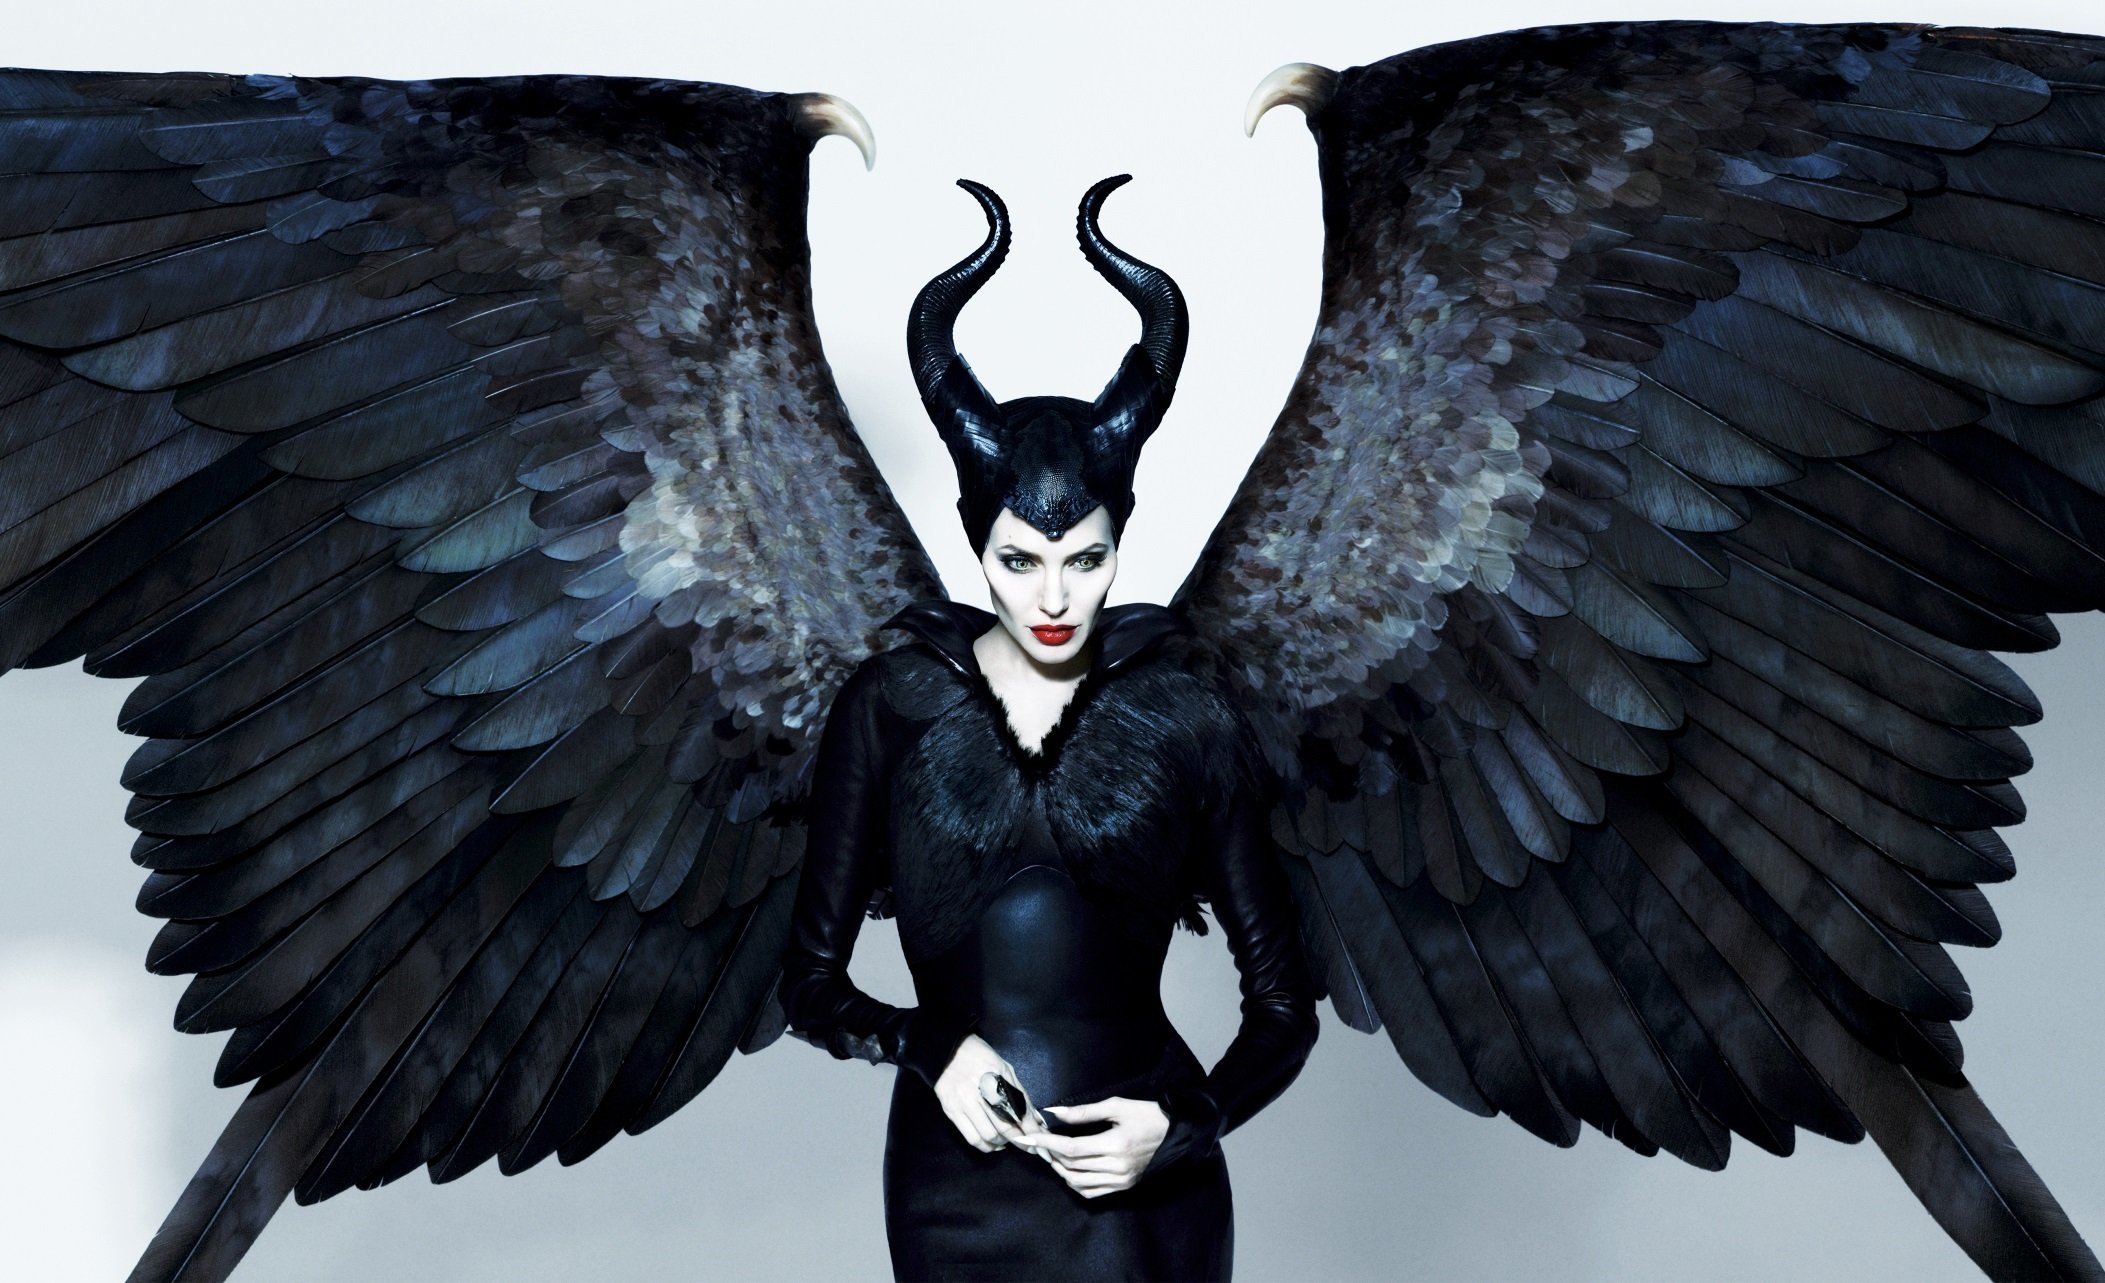 eye chameleon, Angelina, Jolie, Maleficent, Witch, Horns, Black, Actress, Wing Wallpaper